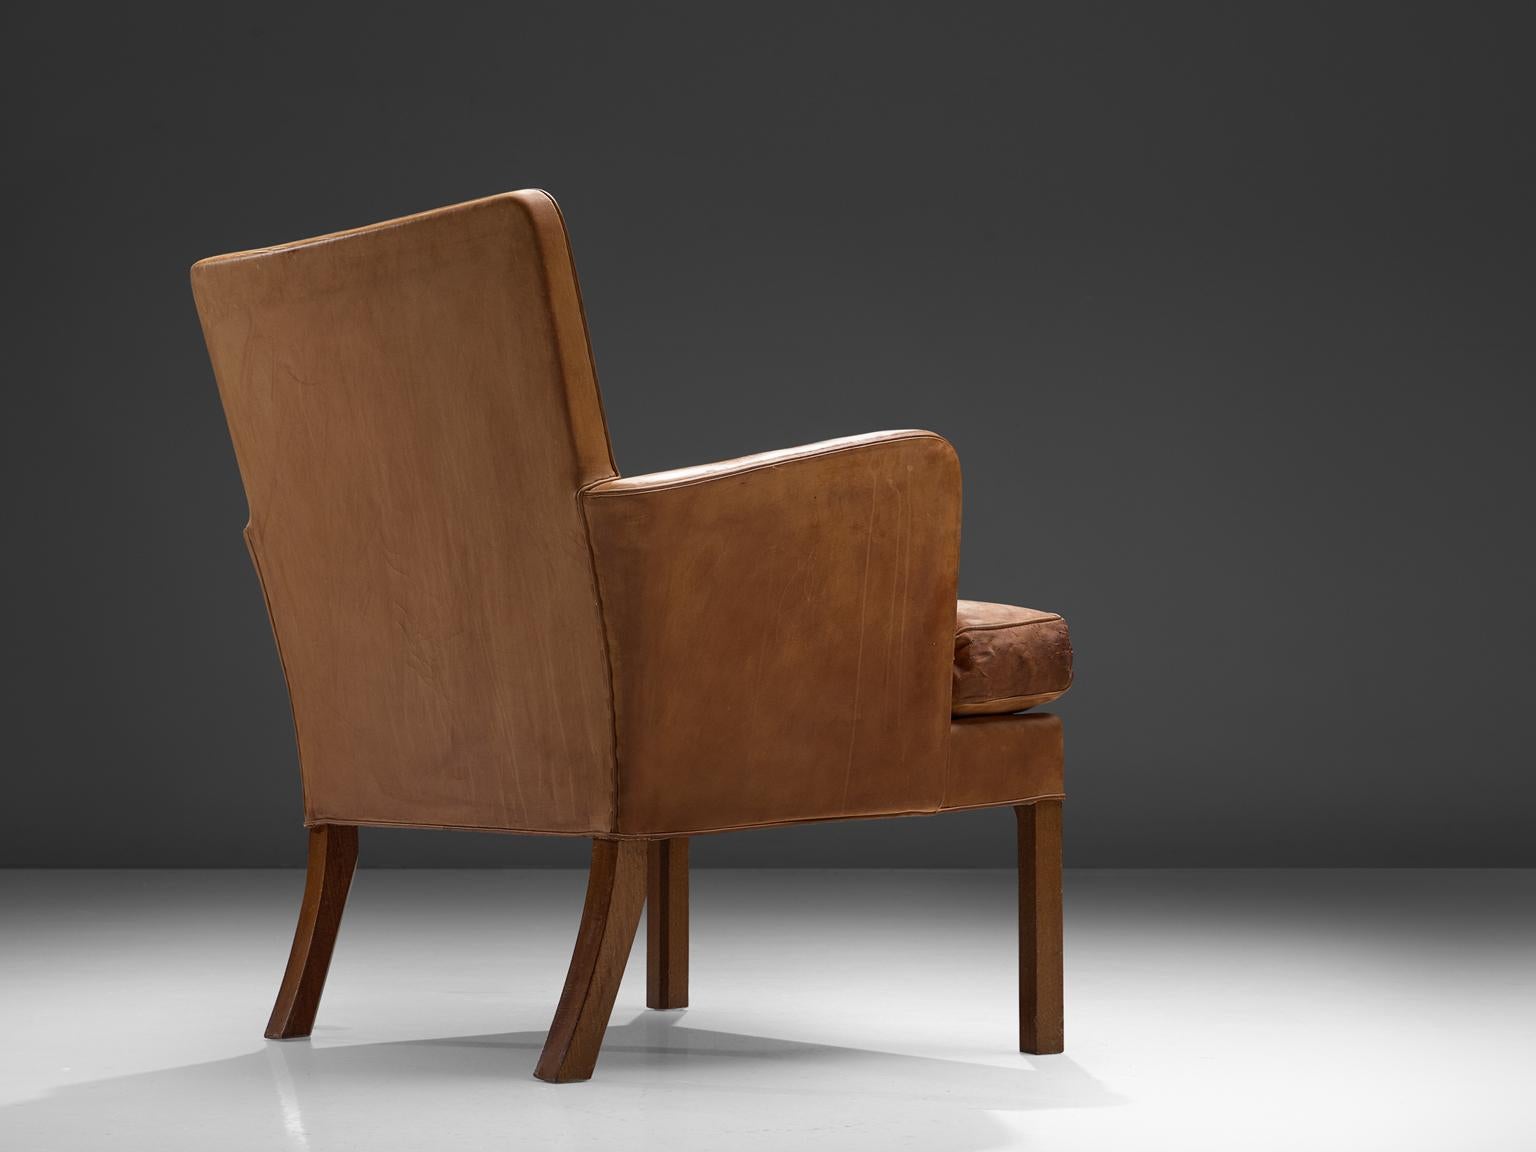 Danish Kaare Klint Lounge Chair with Light Cognac Leather and Mahogany